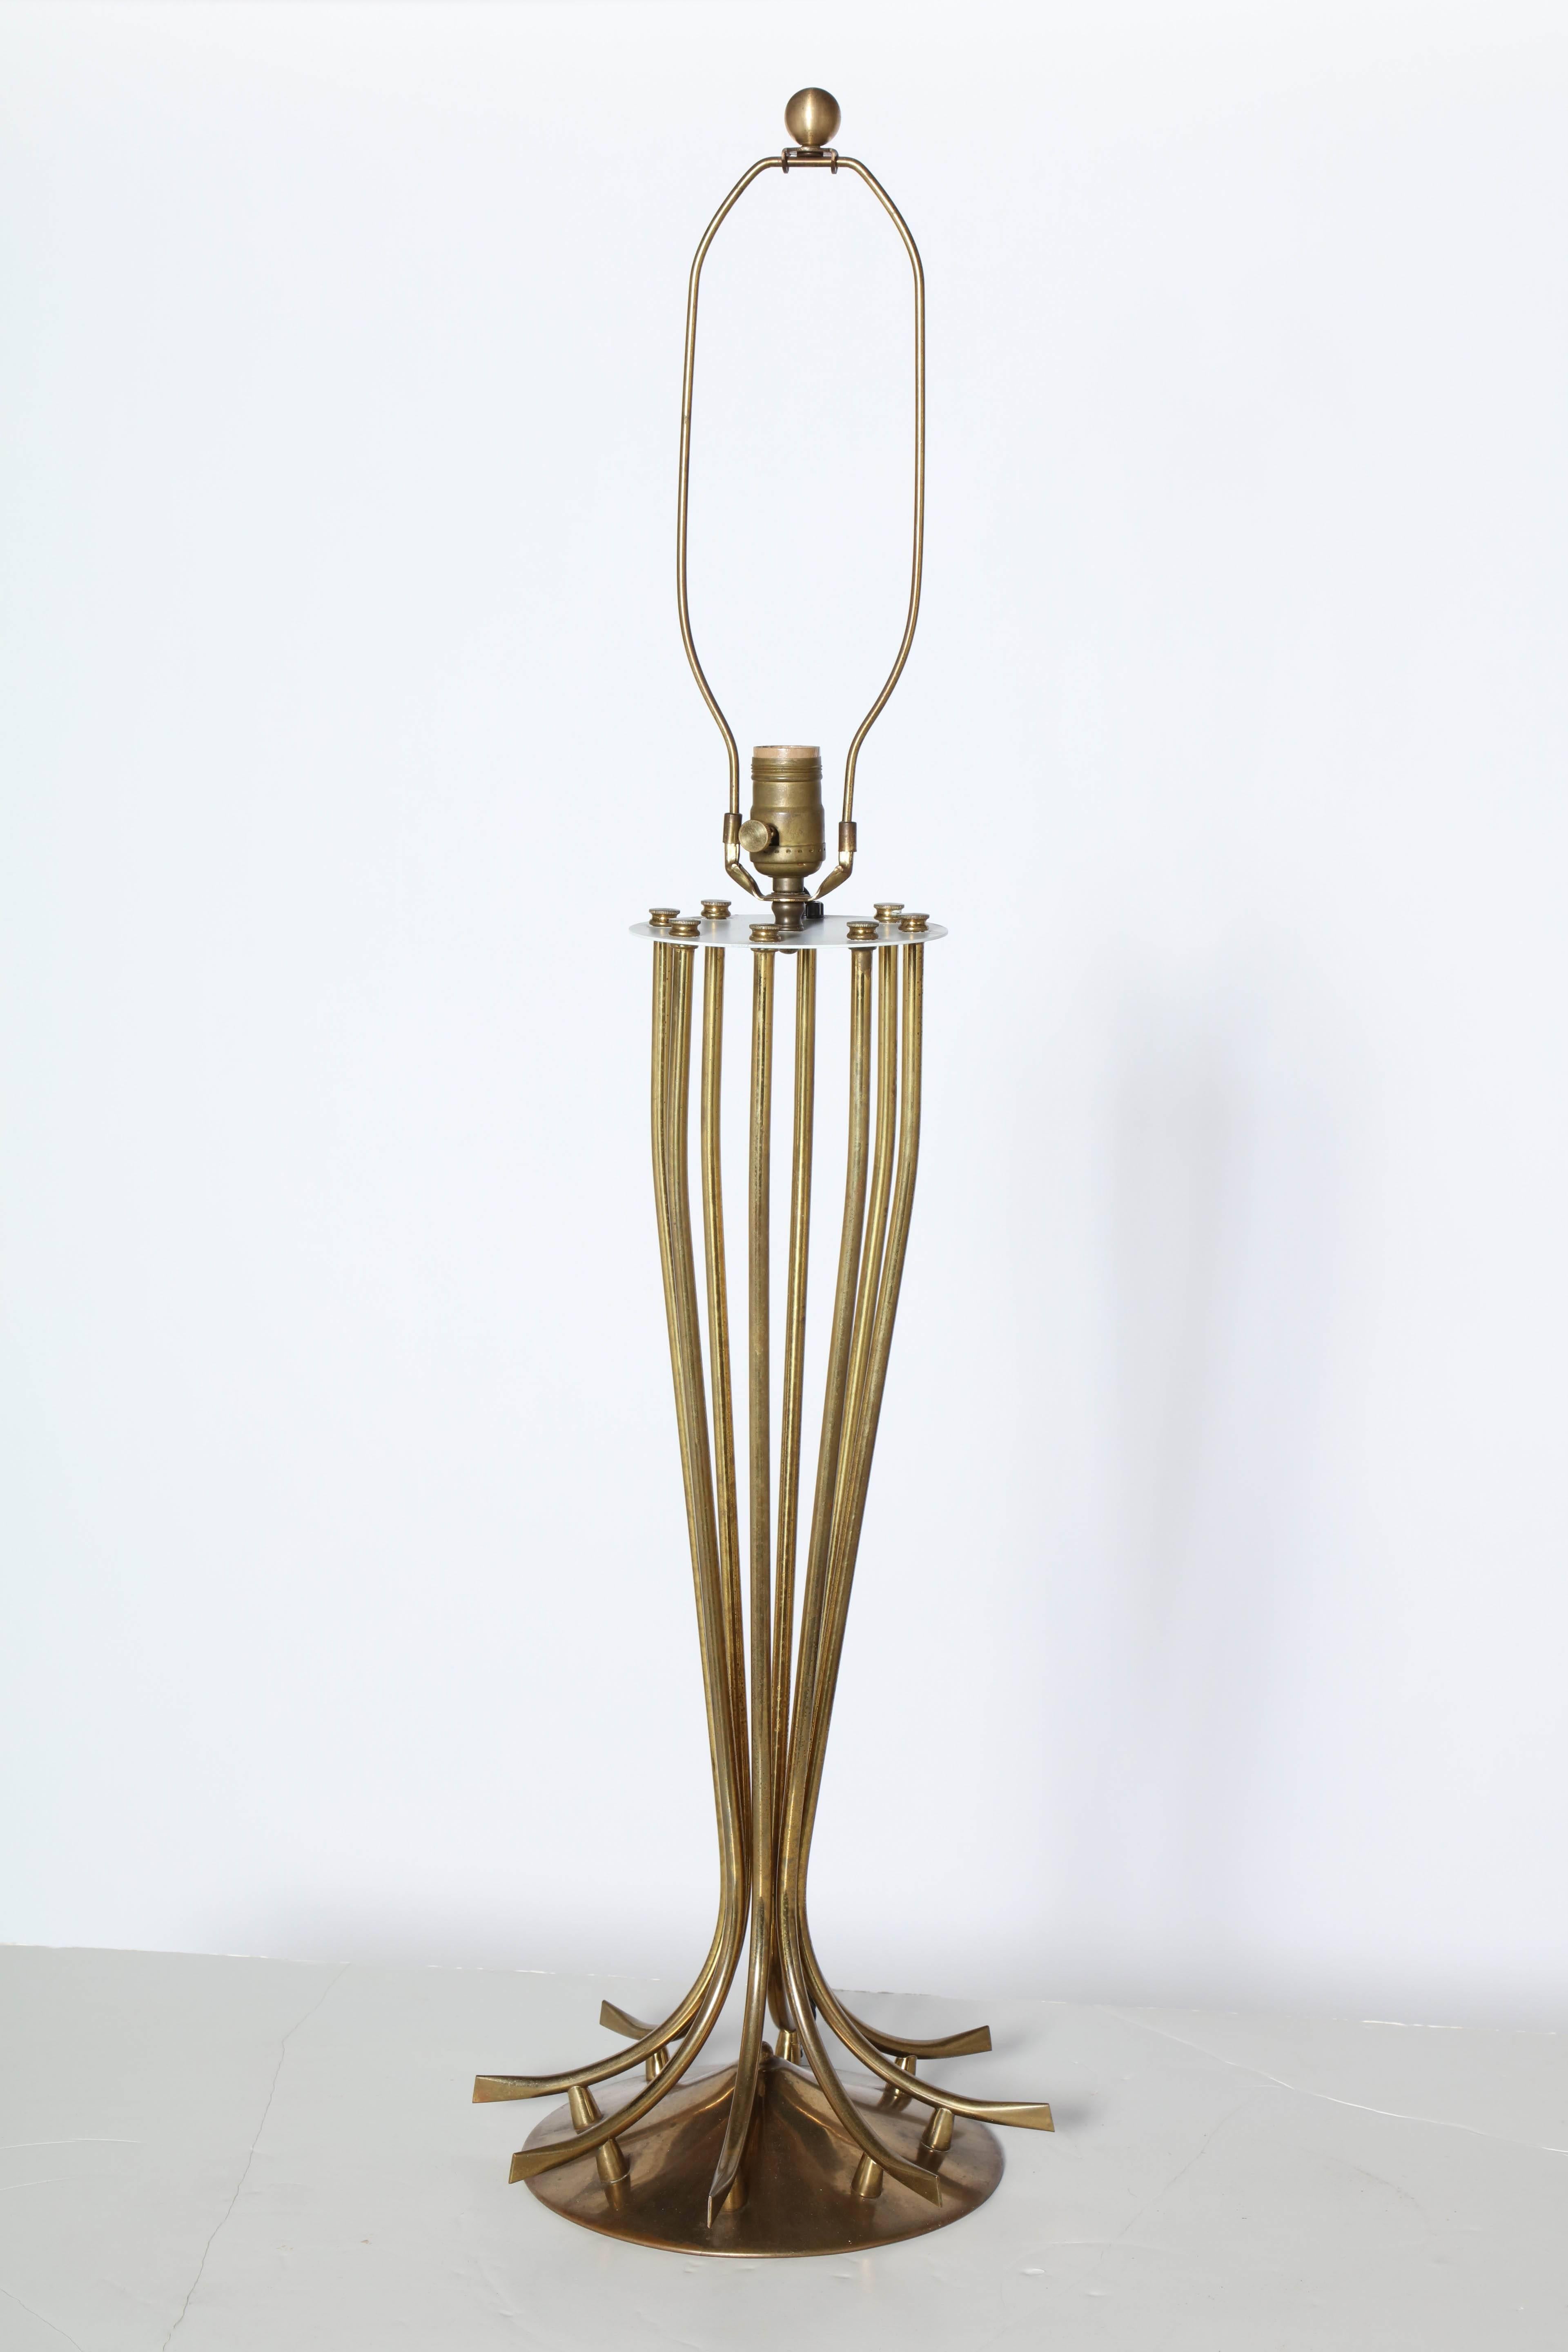 Substantial French Modern Brass Table Lamp. Featuring a low corseted form, eight Brass radiating spokes, elevated supports and round splayed base detailed with a White enameled metal cap. Sculptural. Lyrical. Statement lighting. 